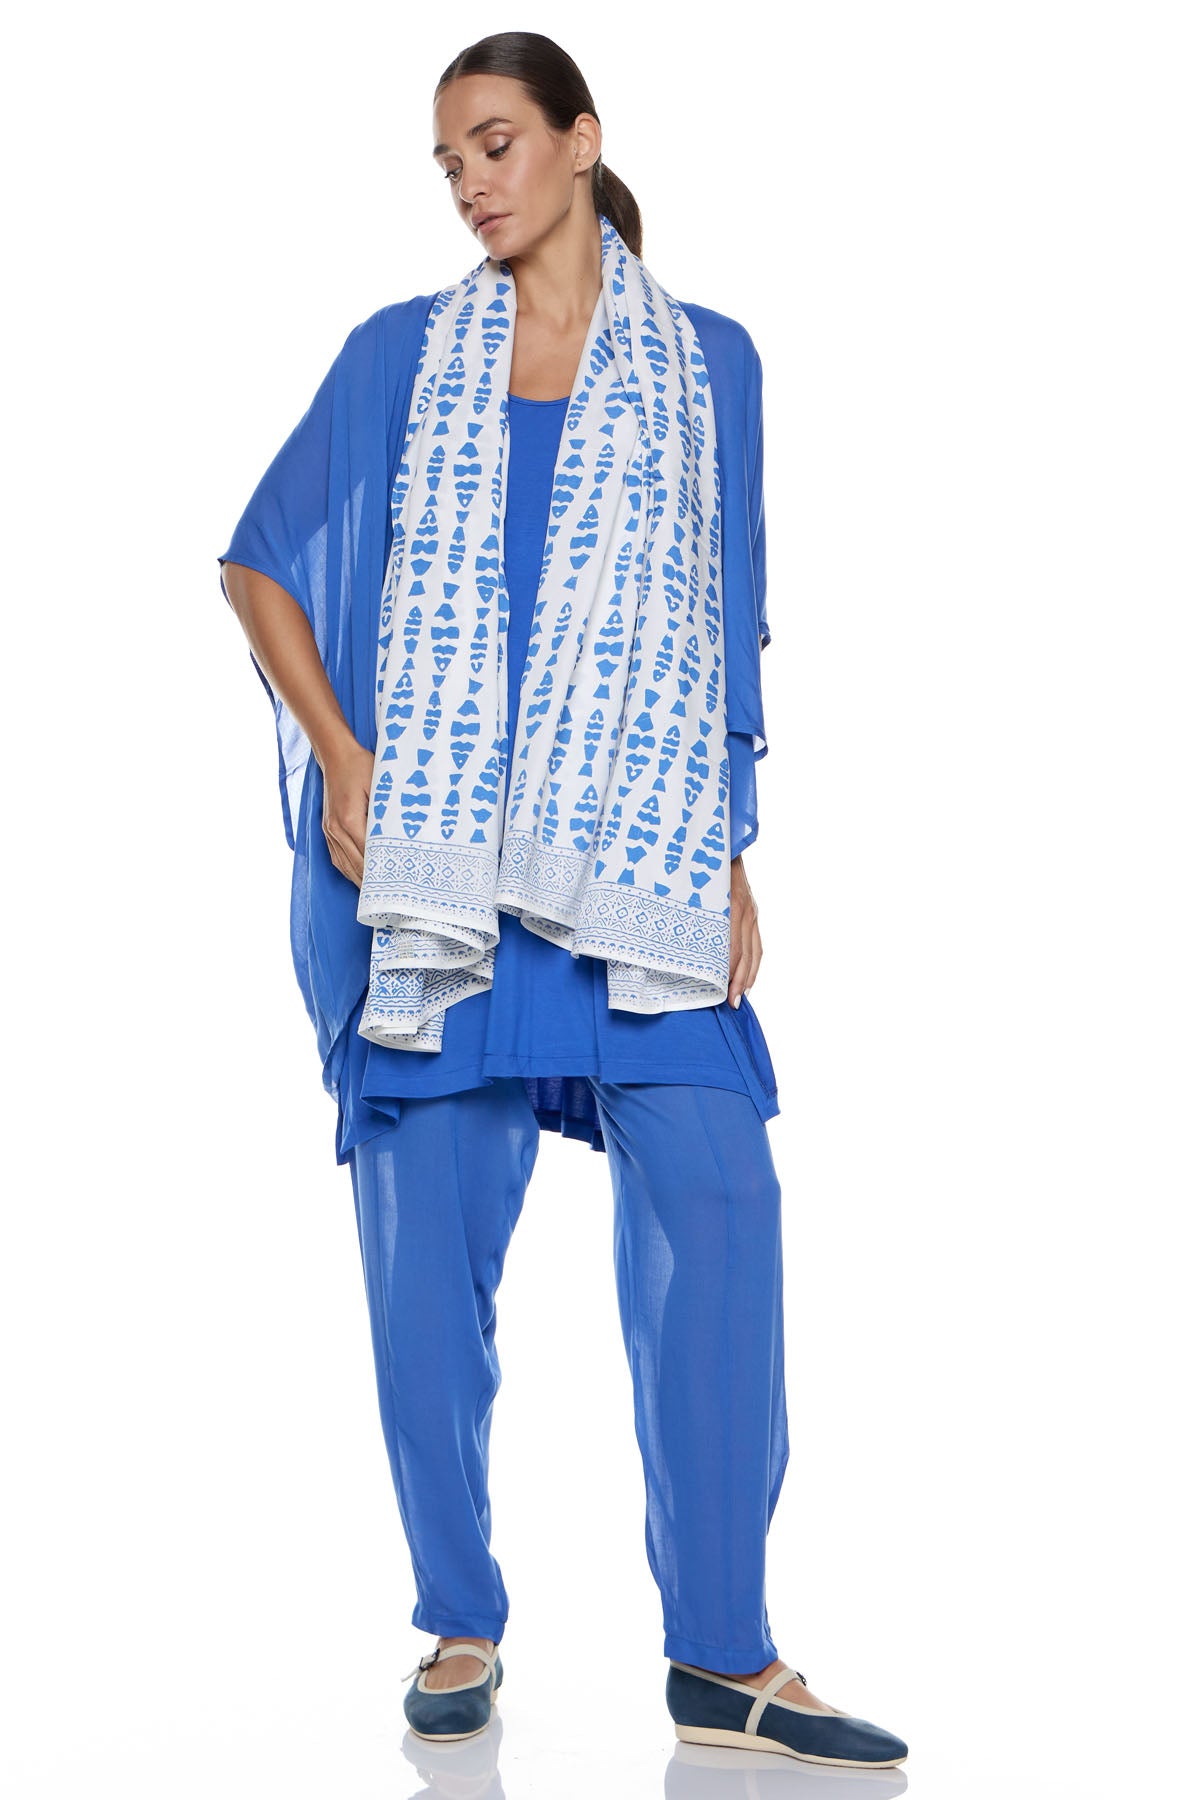 Chic & Simple Pareo / Vivian Scarf - White with Blue FishesChic & Simple Pareo / Vivian Scarf - White with Blue Fishes